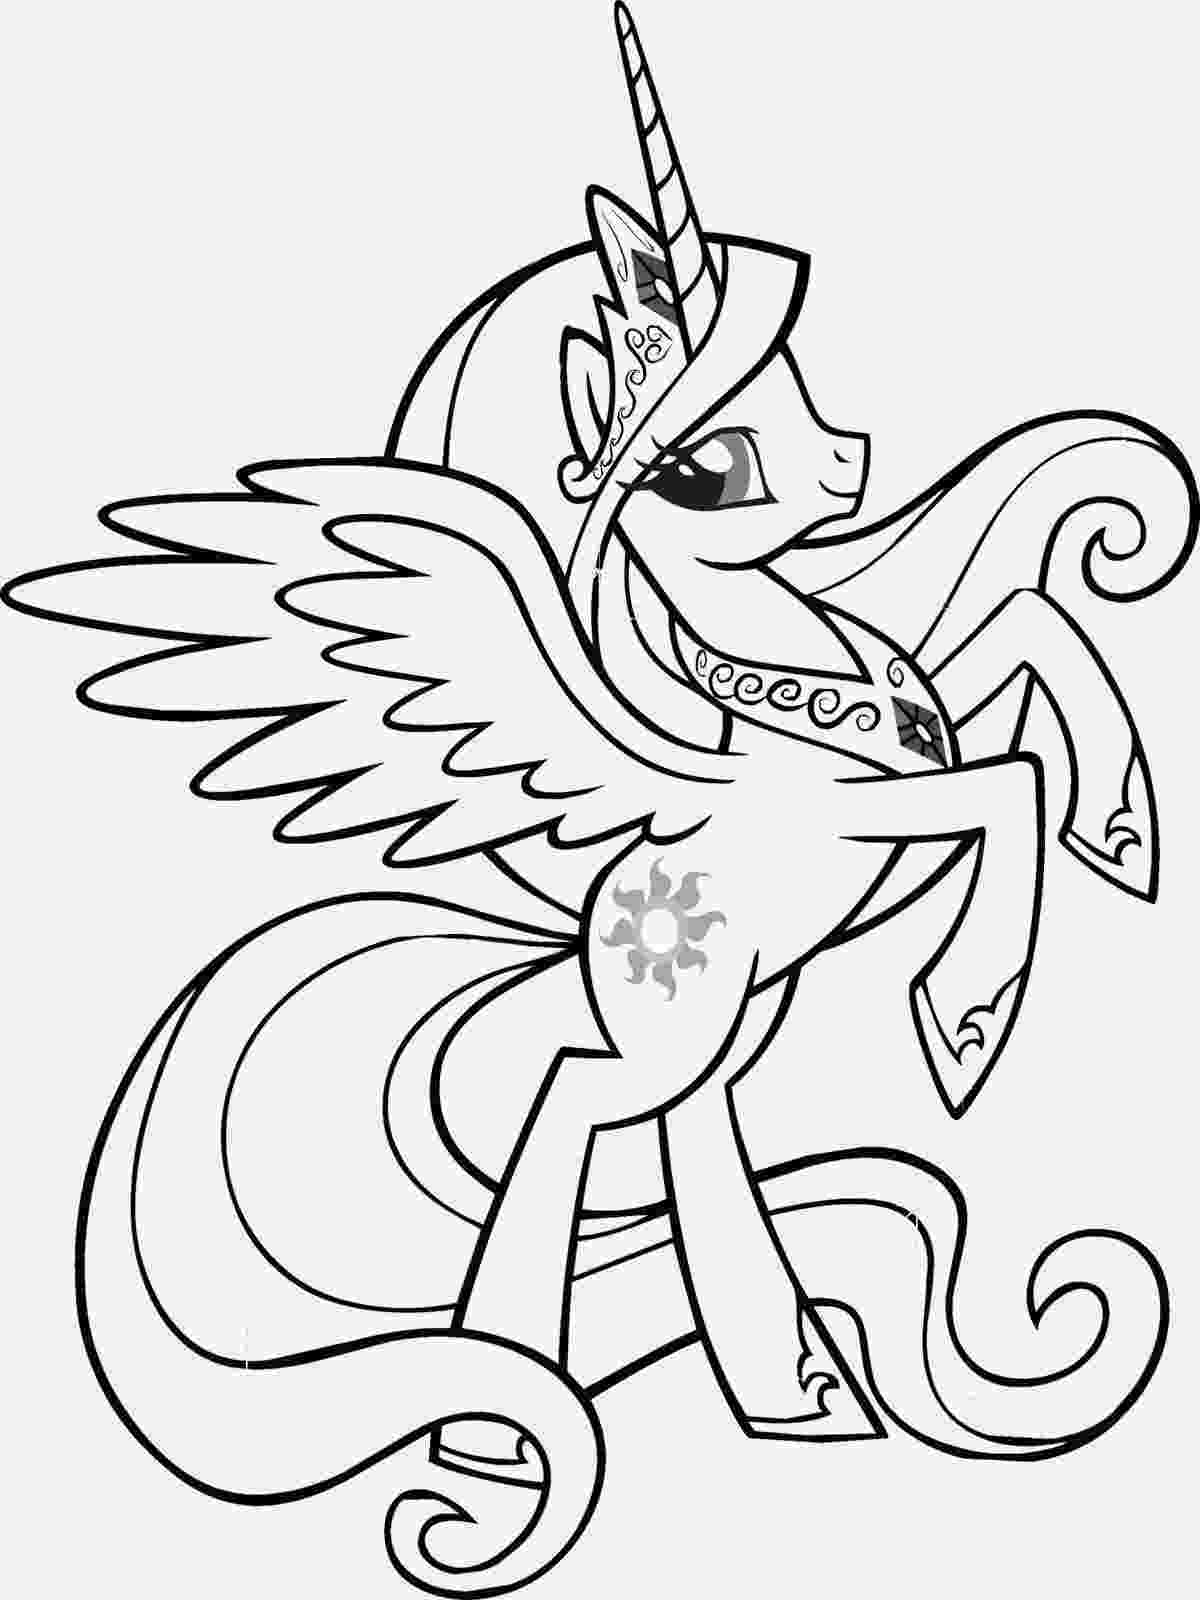 unicorn picture to color unicorn coloring pages to download and print for free color unicorn picture to 